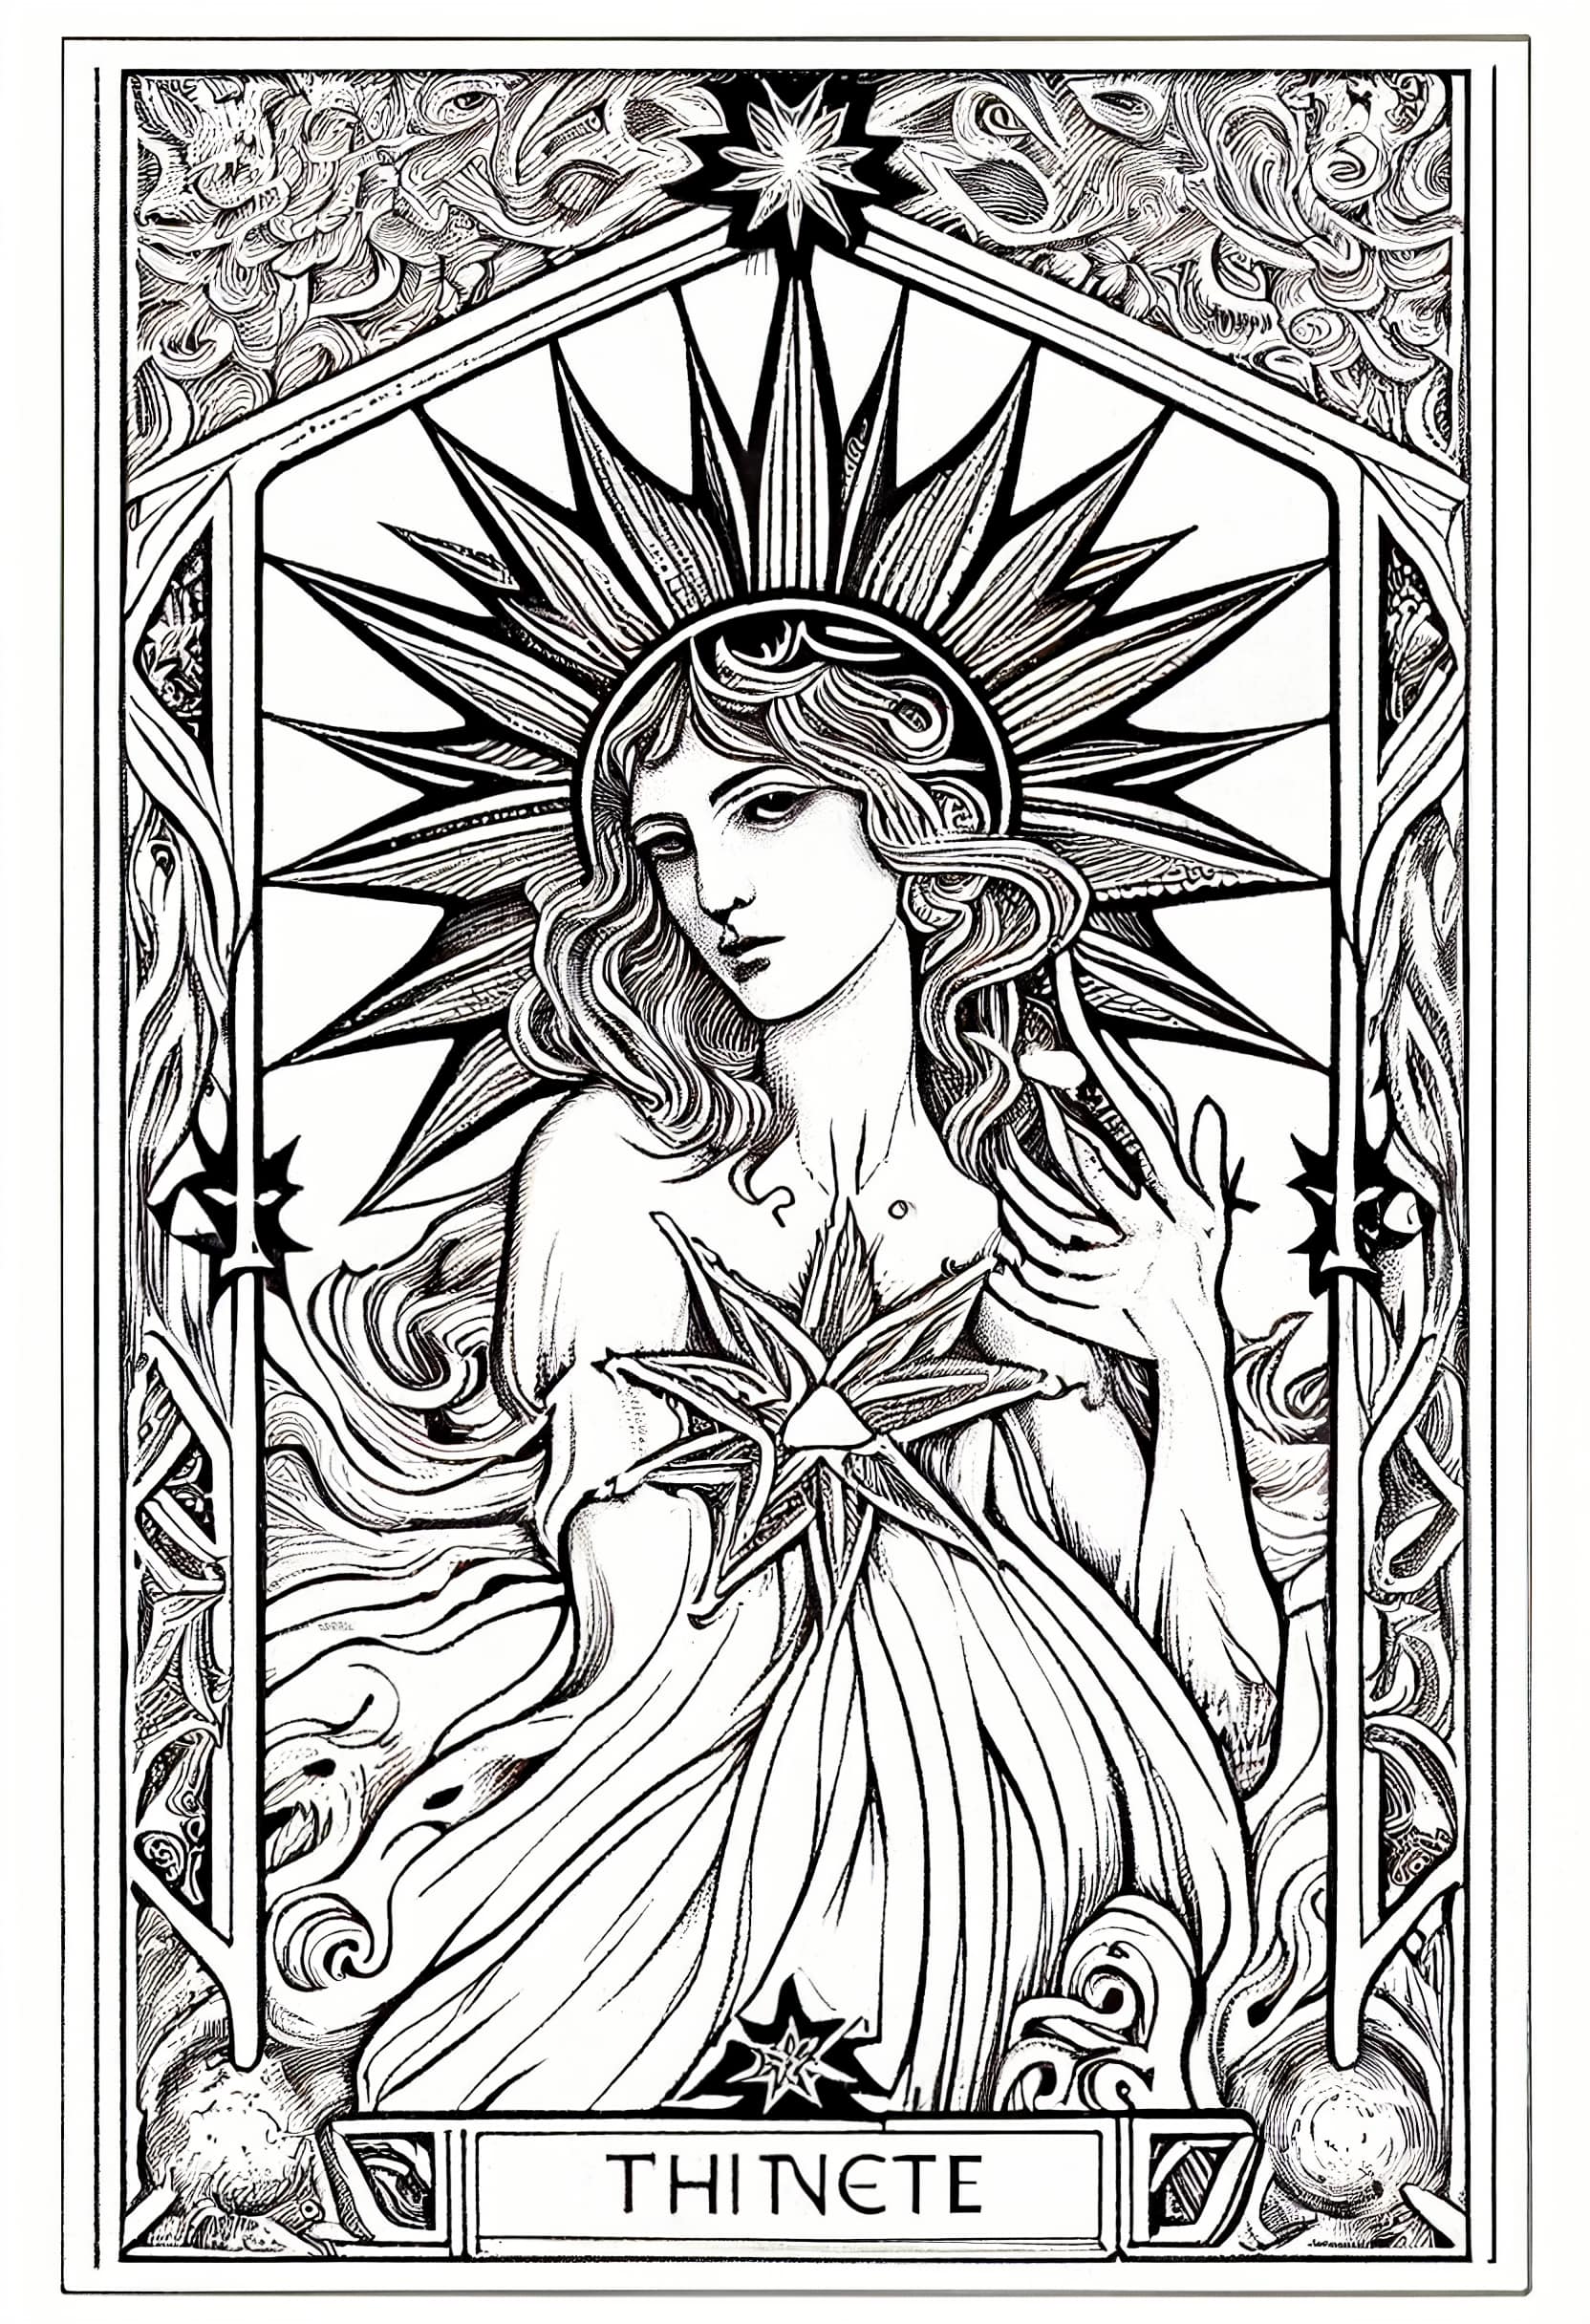 Black and white drawing of a woman holding a star.